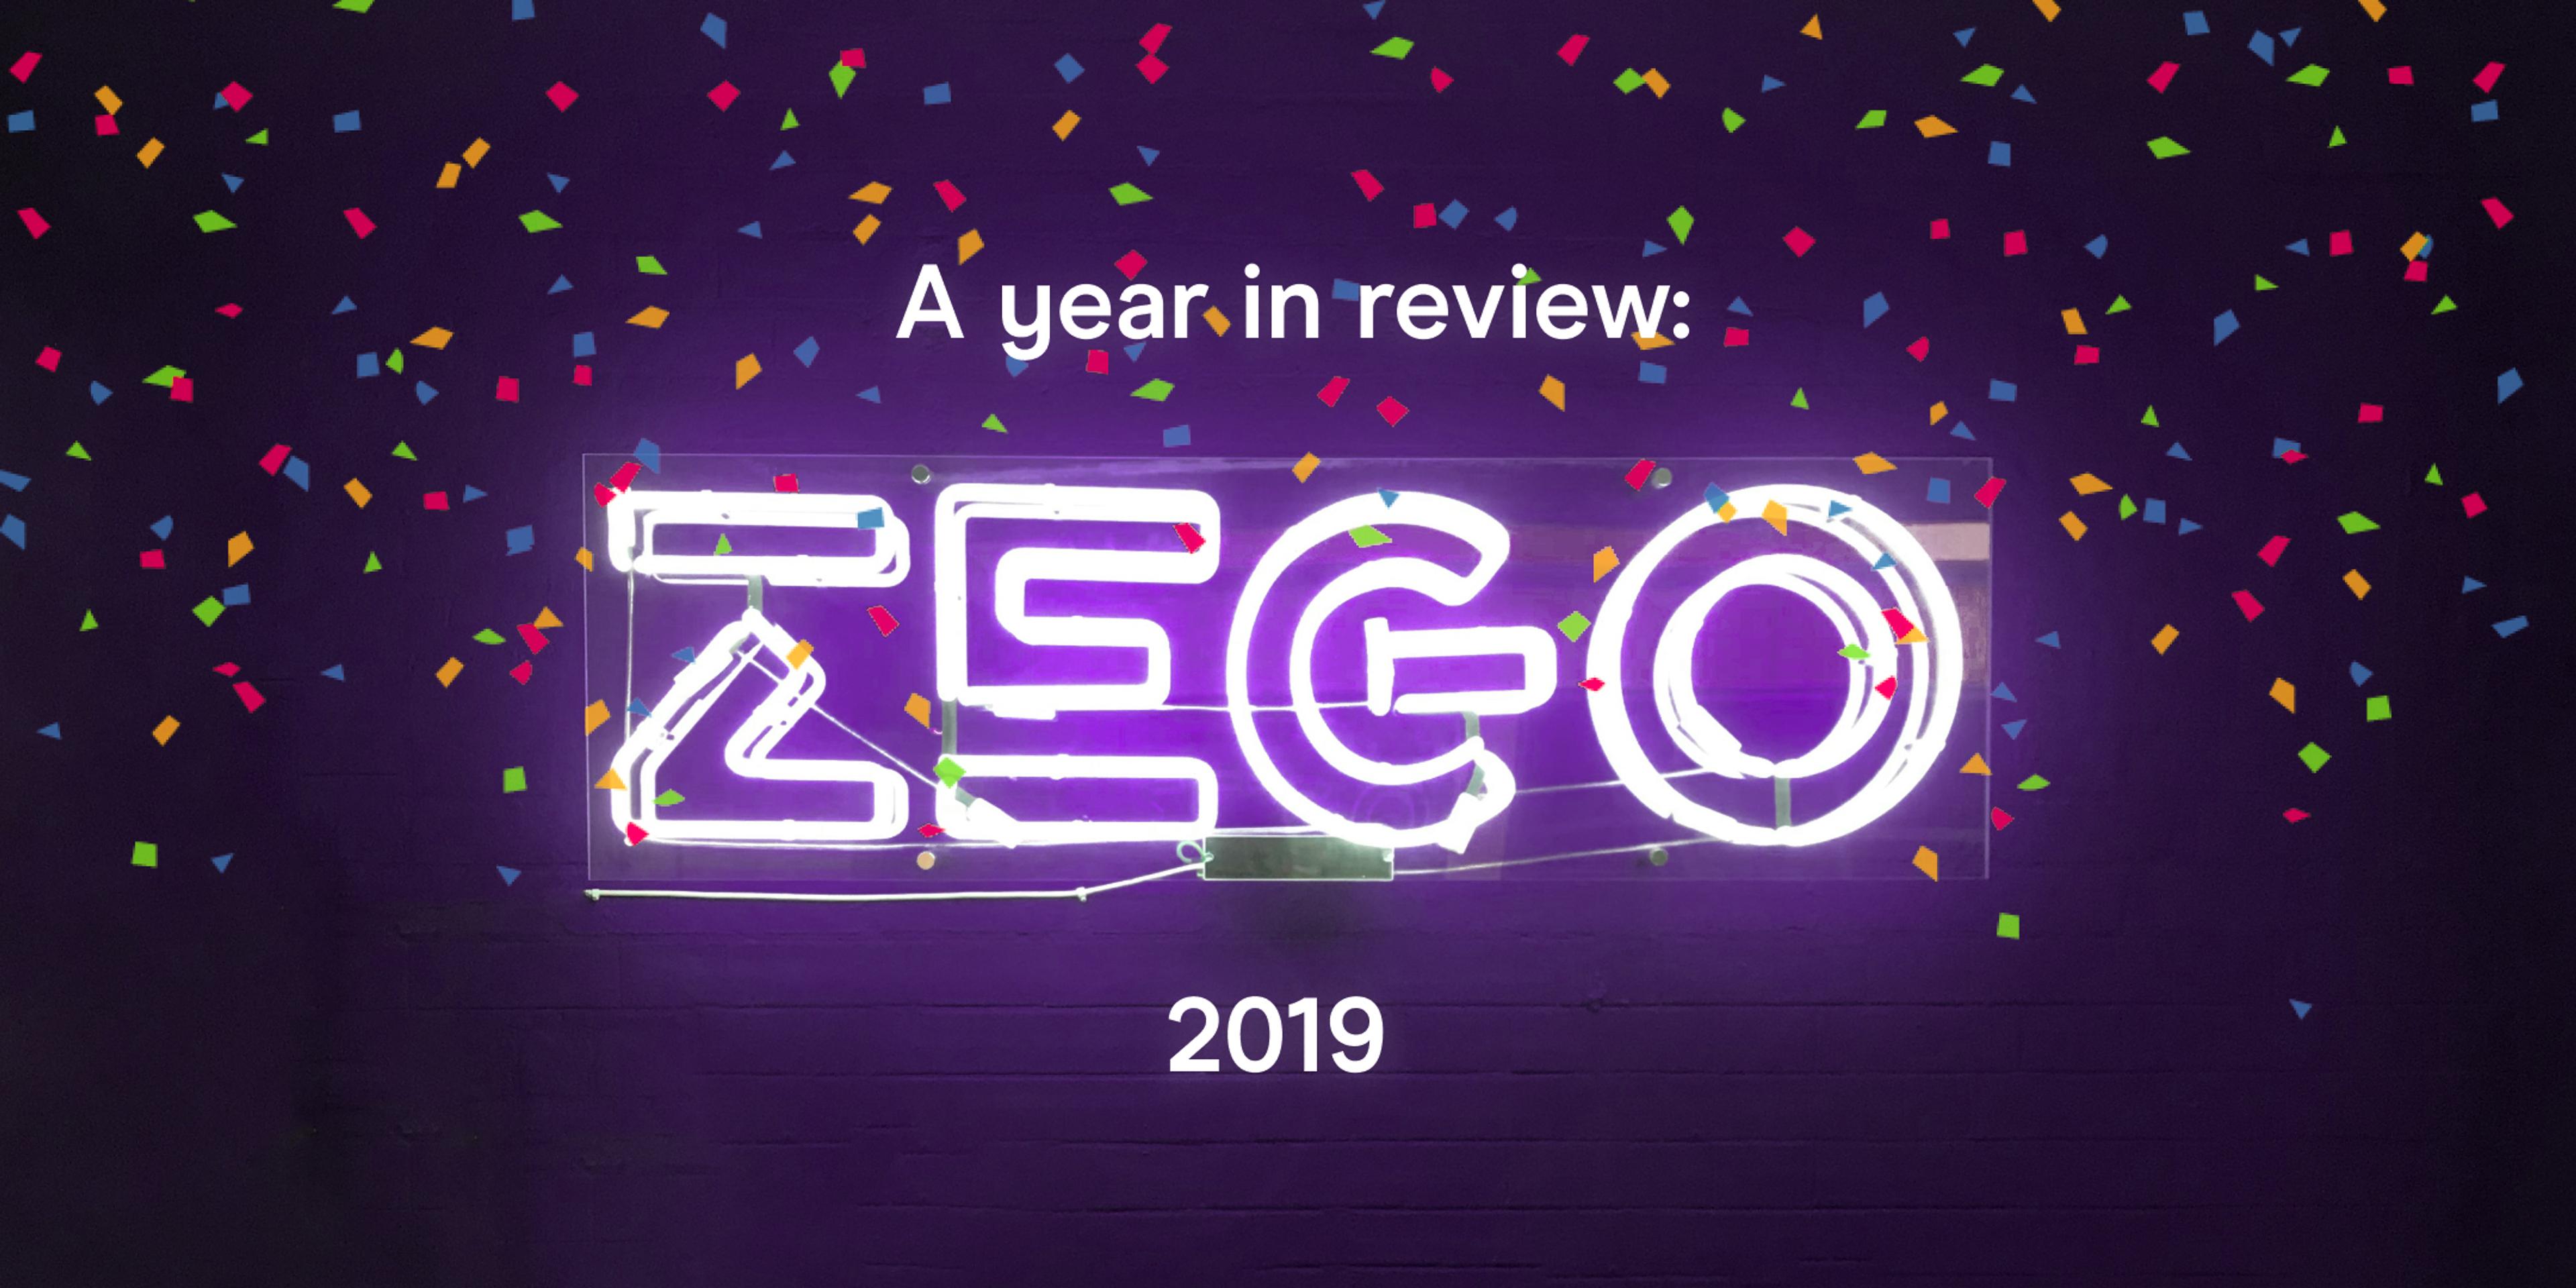 Zego 2019: a year in review